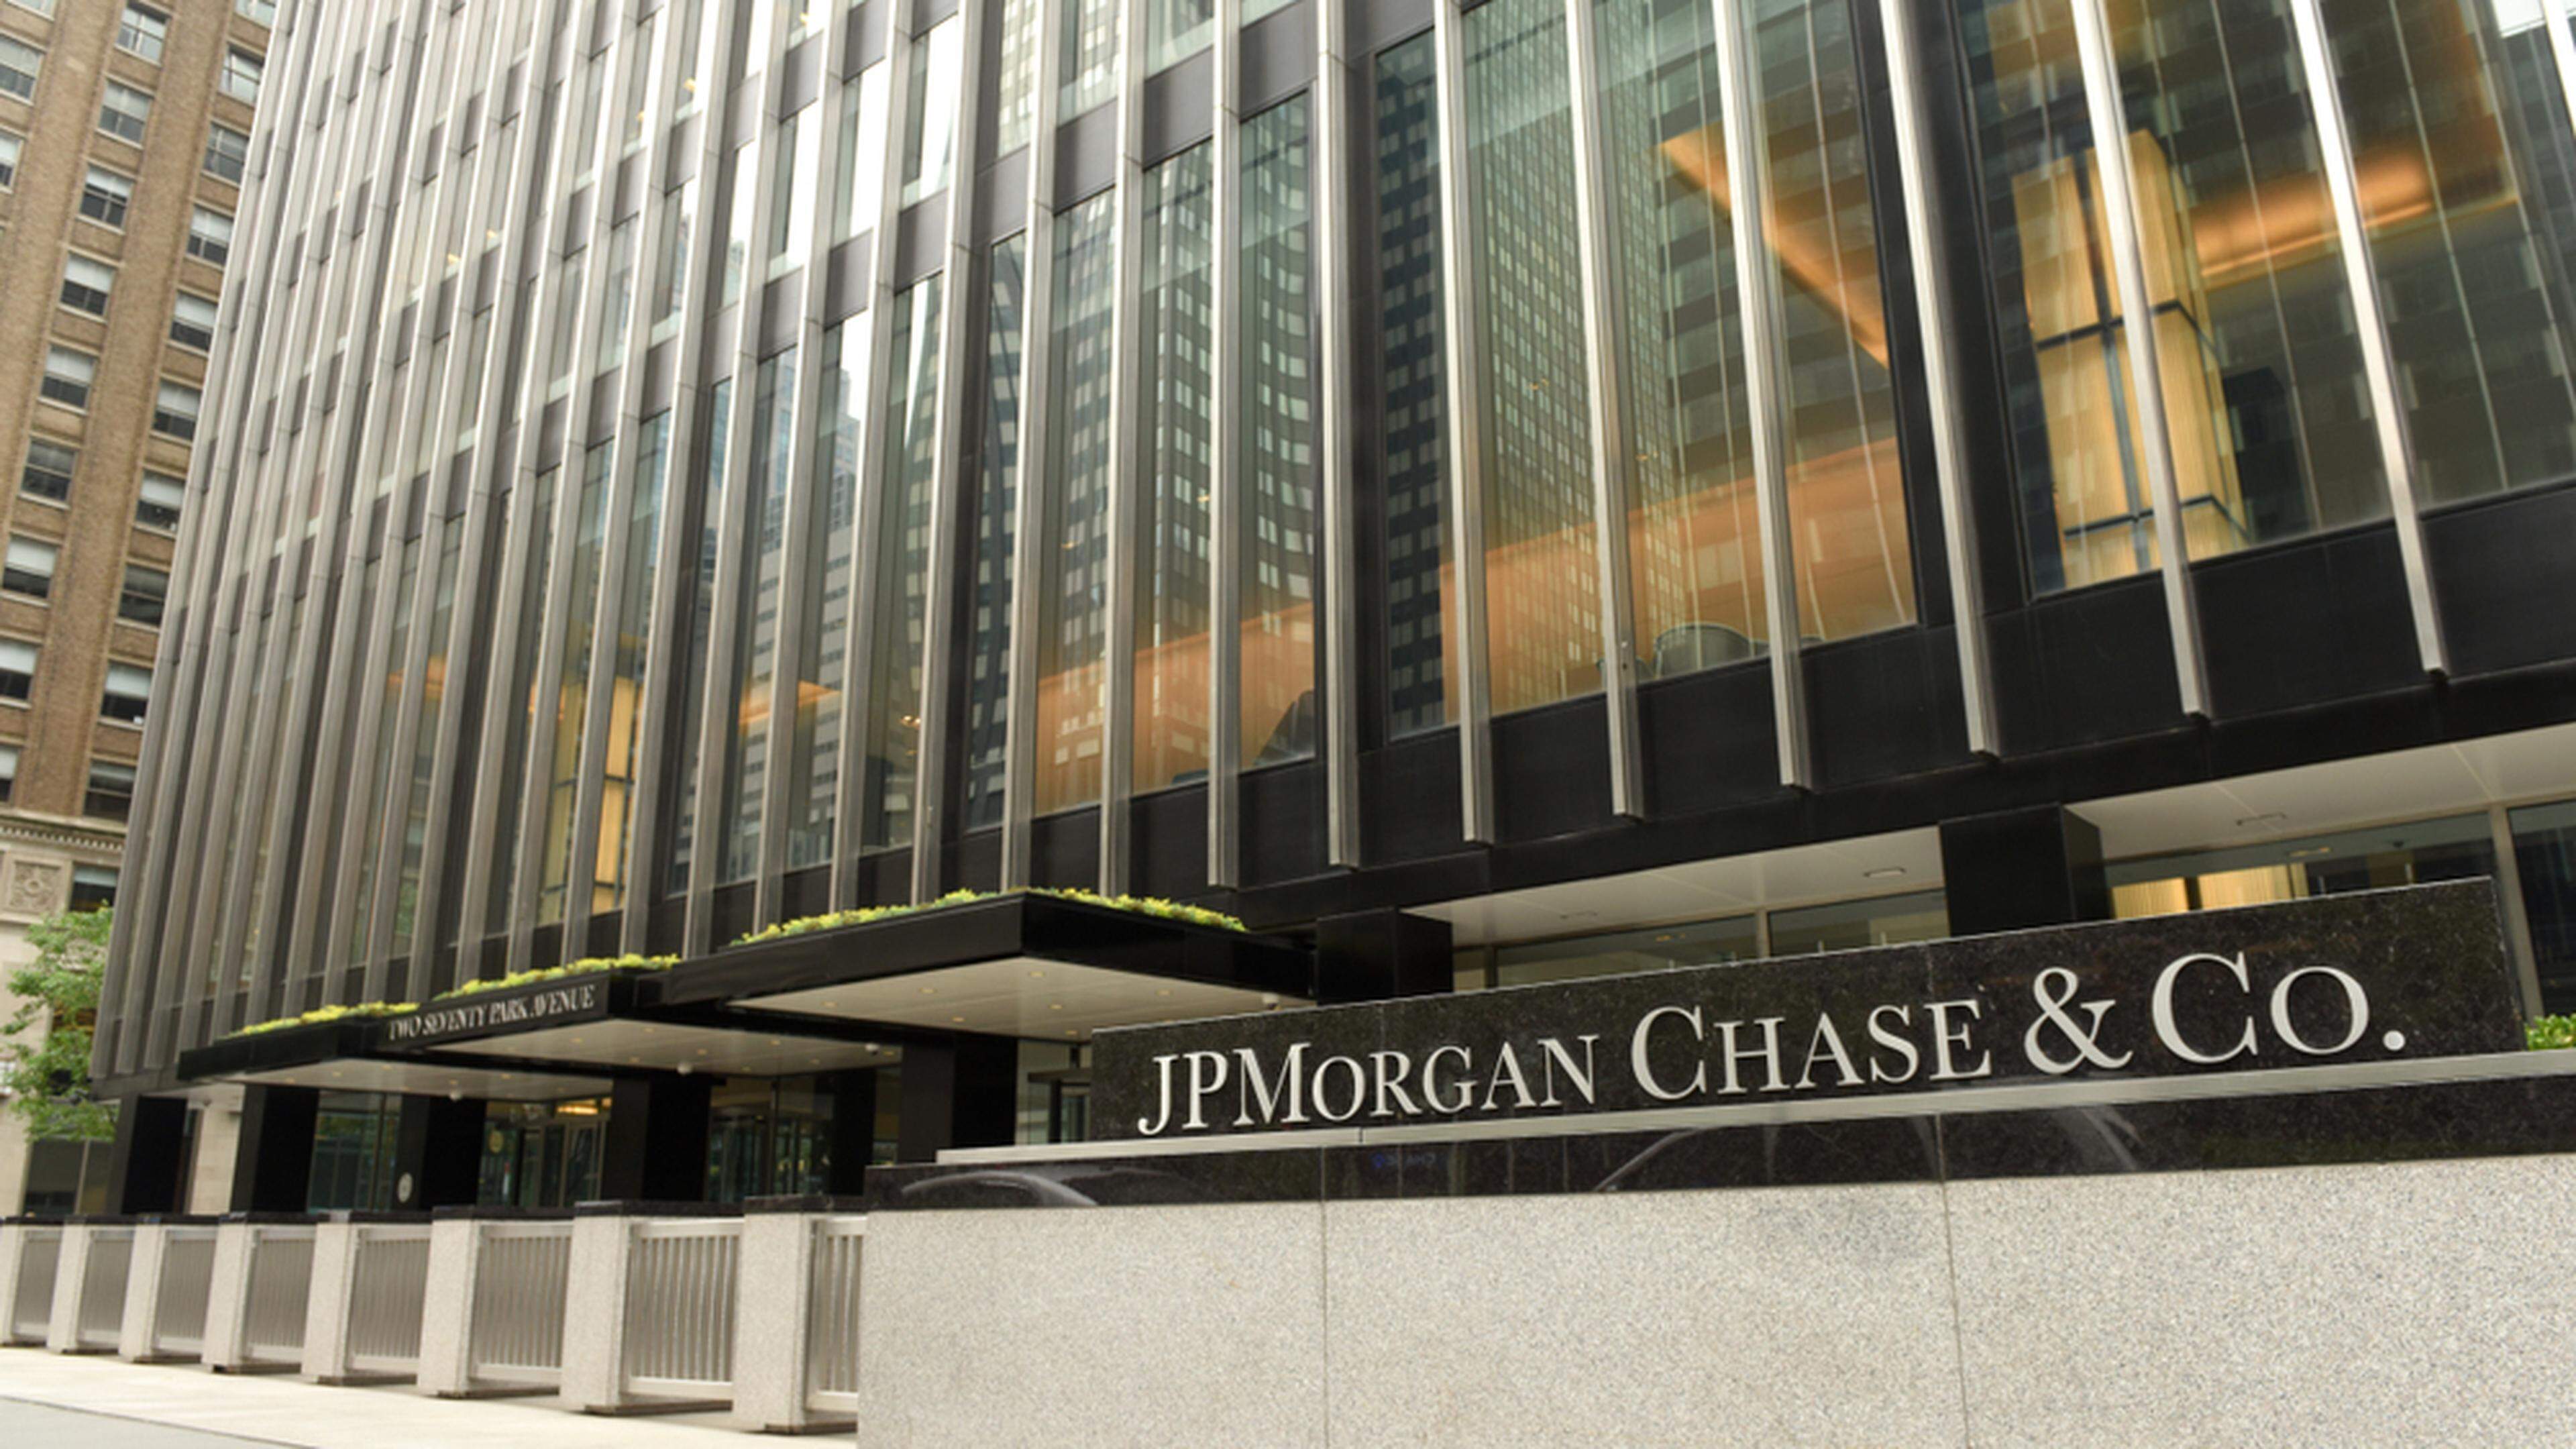 JPMorgan Chase & Co office at the Park Ave in New York